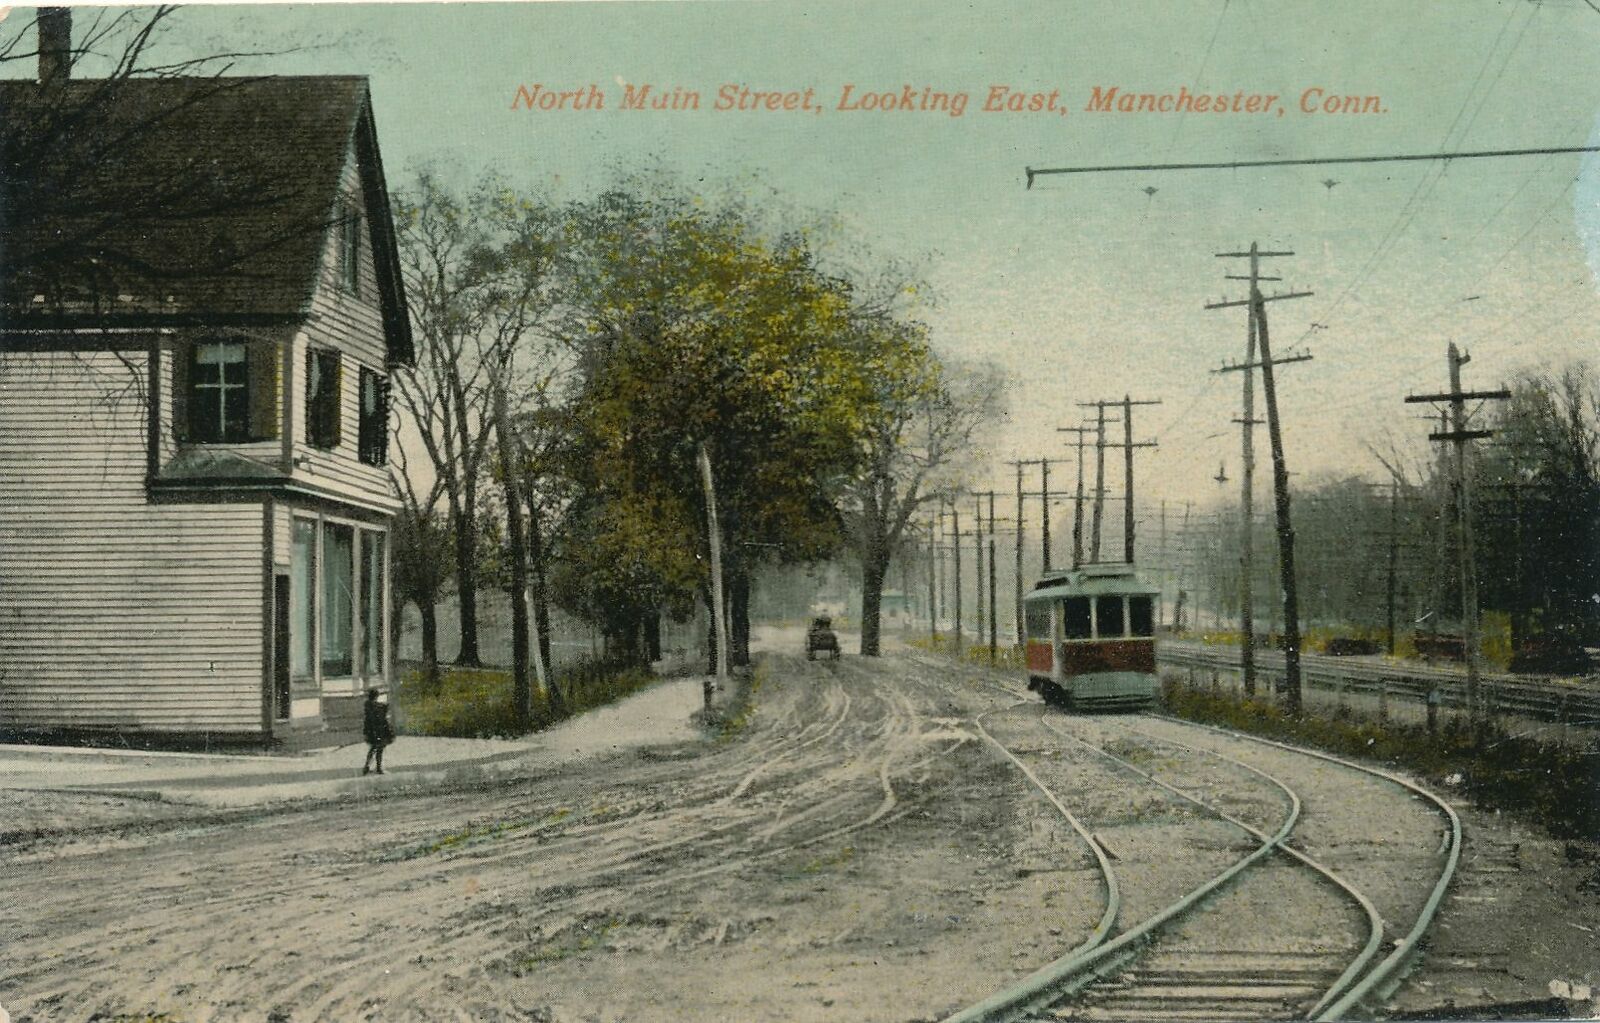 MANCHESTER CT - North Main Street looking East showing Trolley